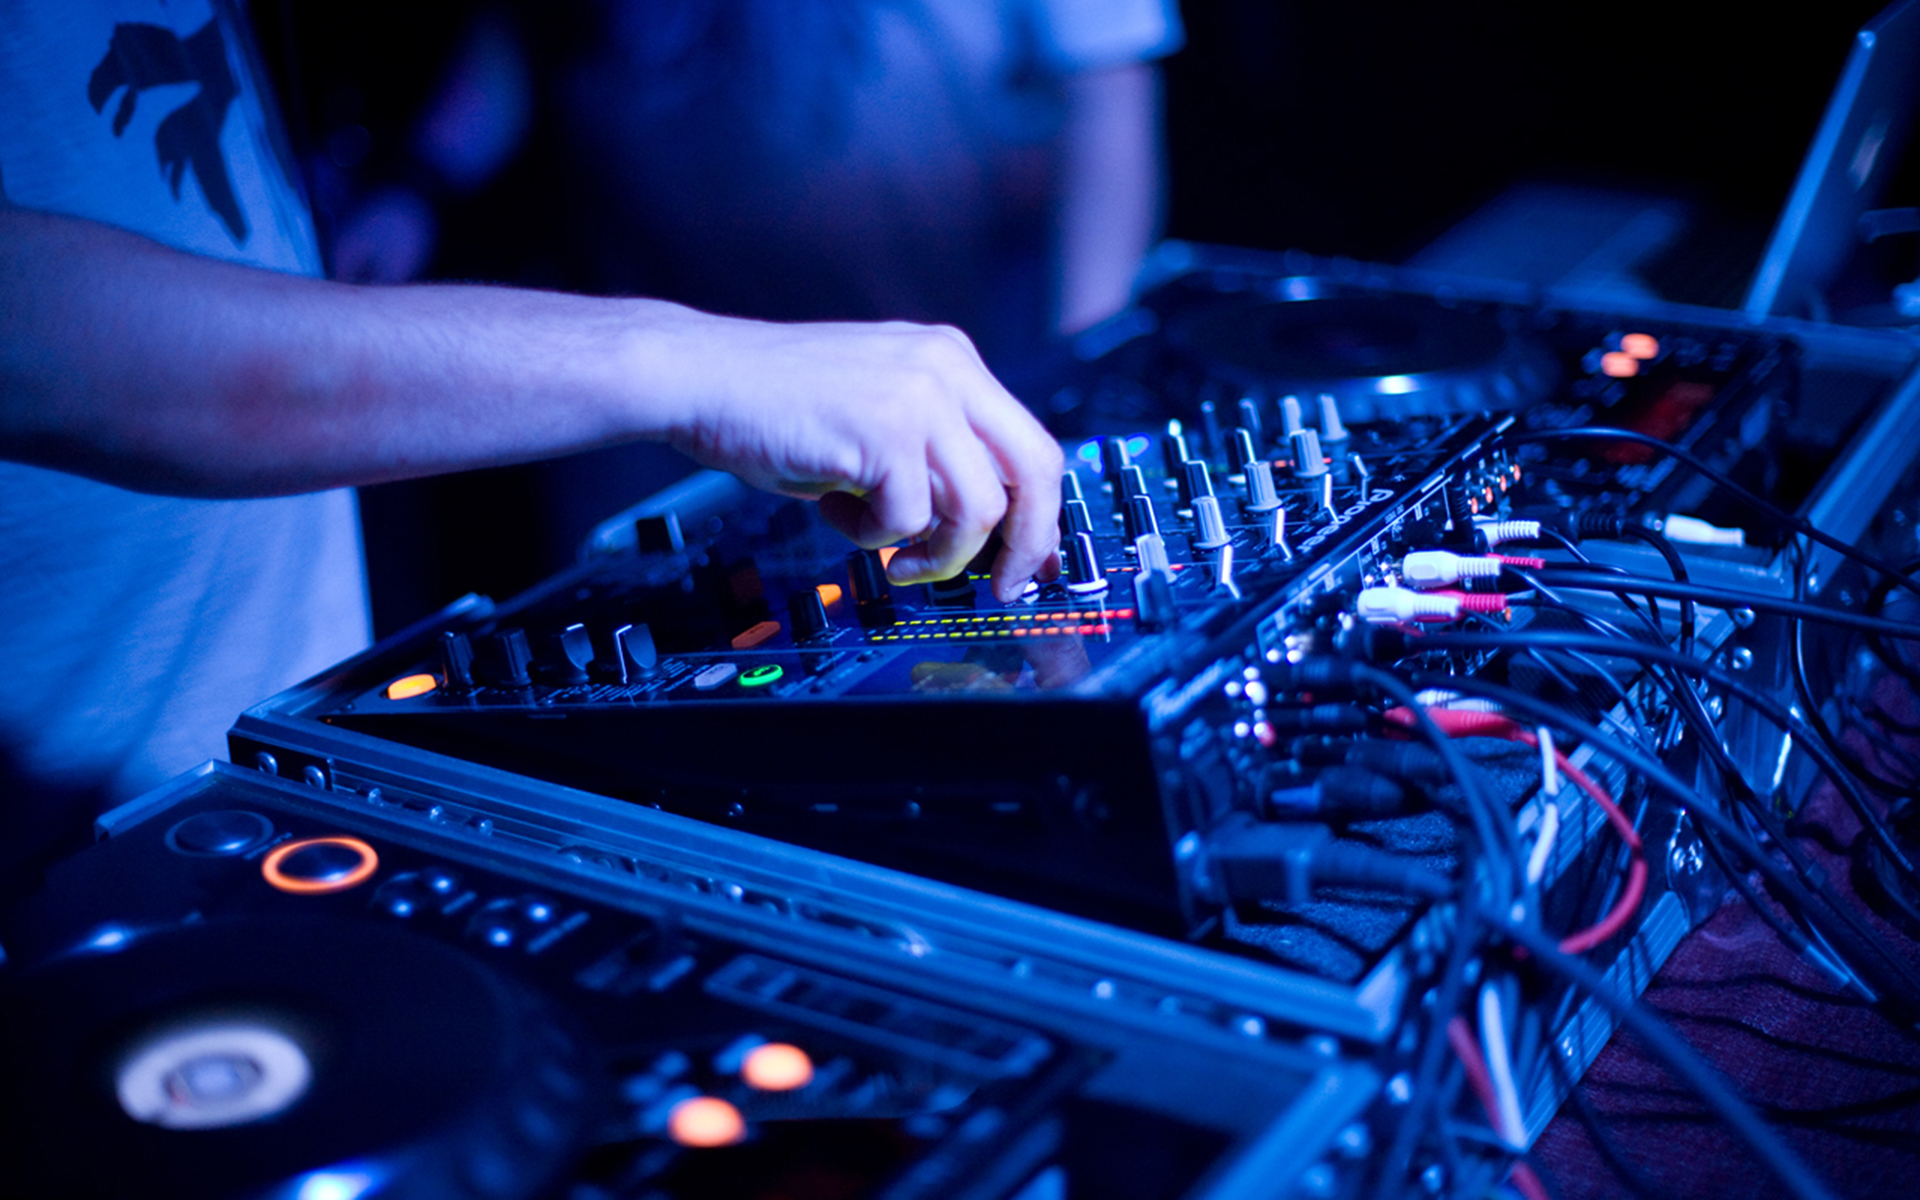 574032 2000x1331 dj turntables mixing consoles - Rare Gallery HD Wallpapers